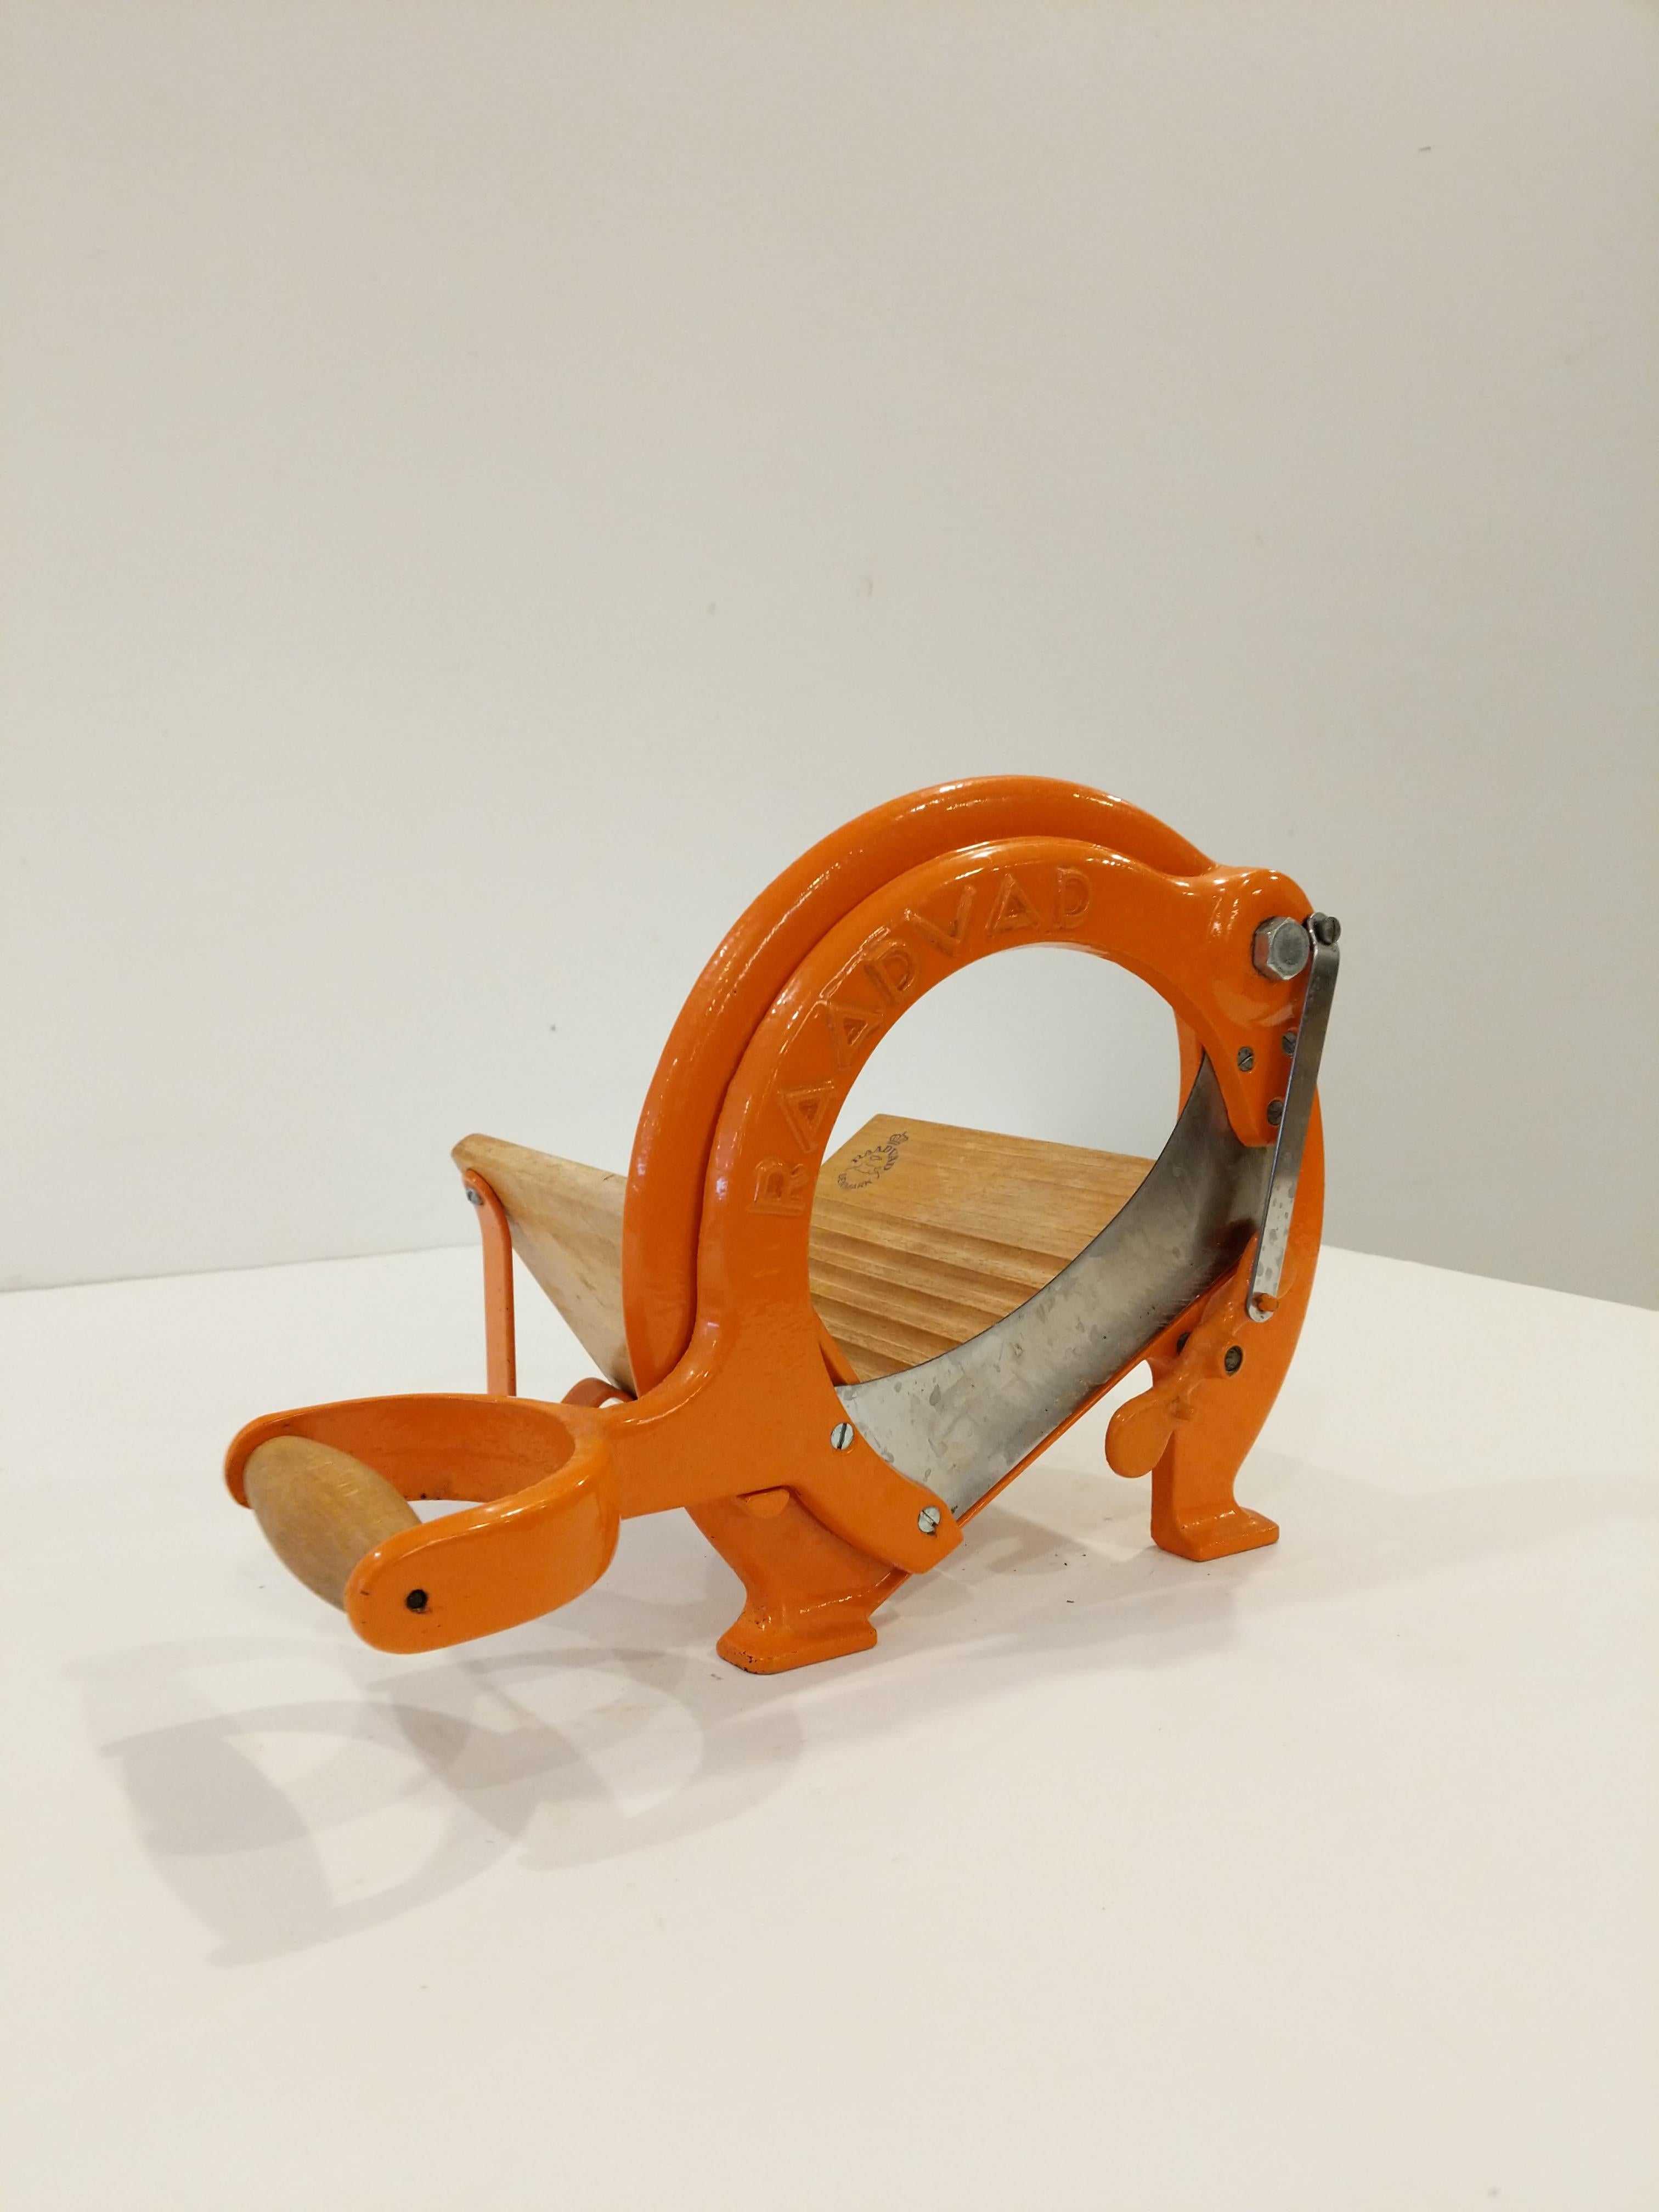 Authentic vintage Danish bread slicer / guillotine in orange.

Model 294 by Raadvad.

This slicer is in good condition overall and expectedly shows its age a bit.

Dimensions:
13.5” Long including handle
9.5” Tall
8” Wide

Ref: RV27-009